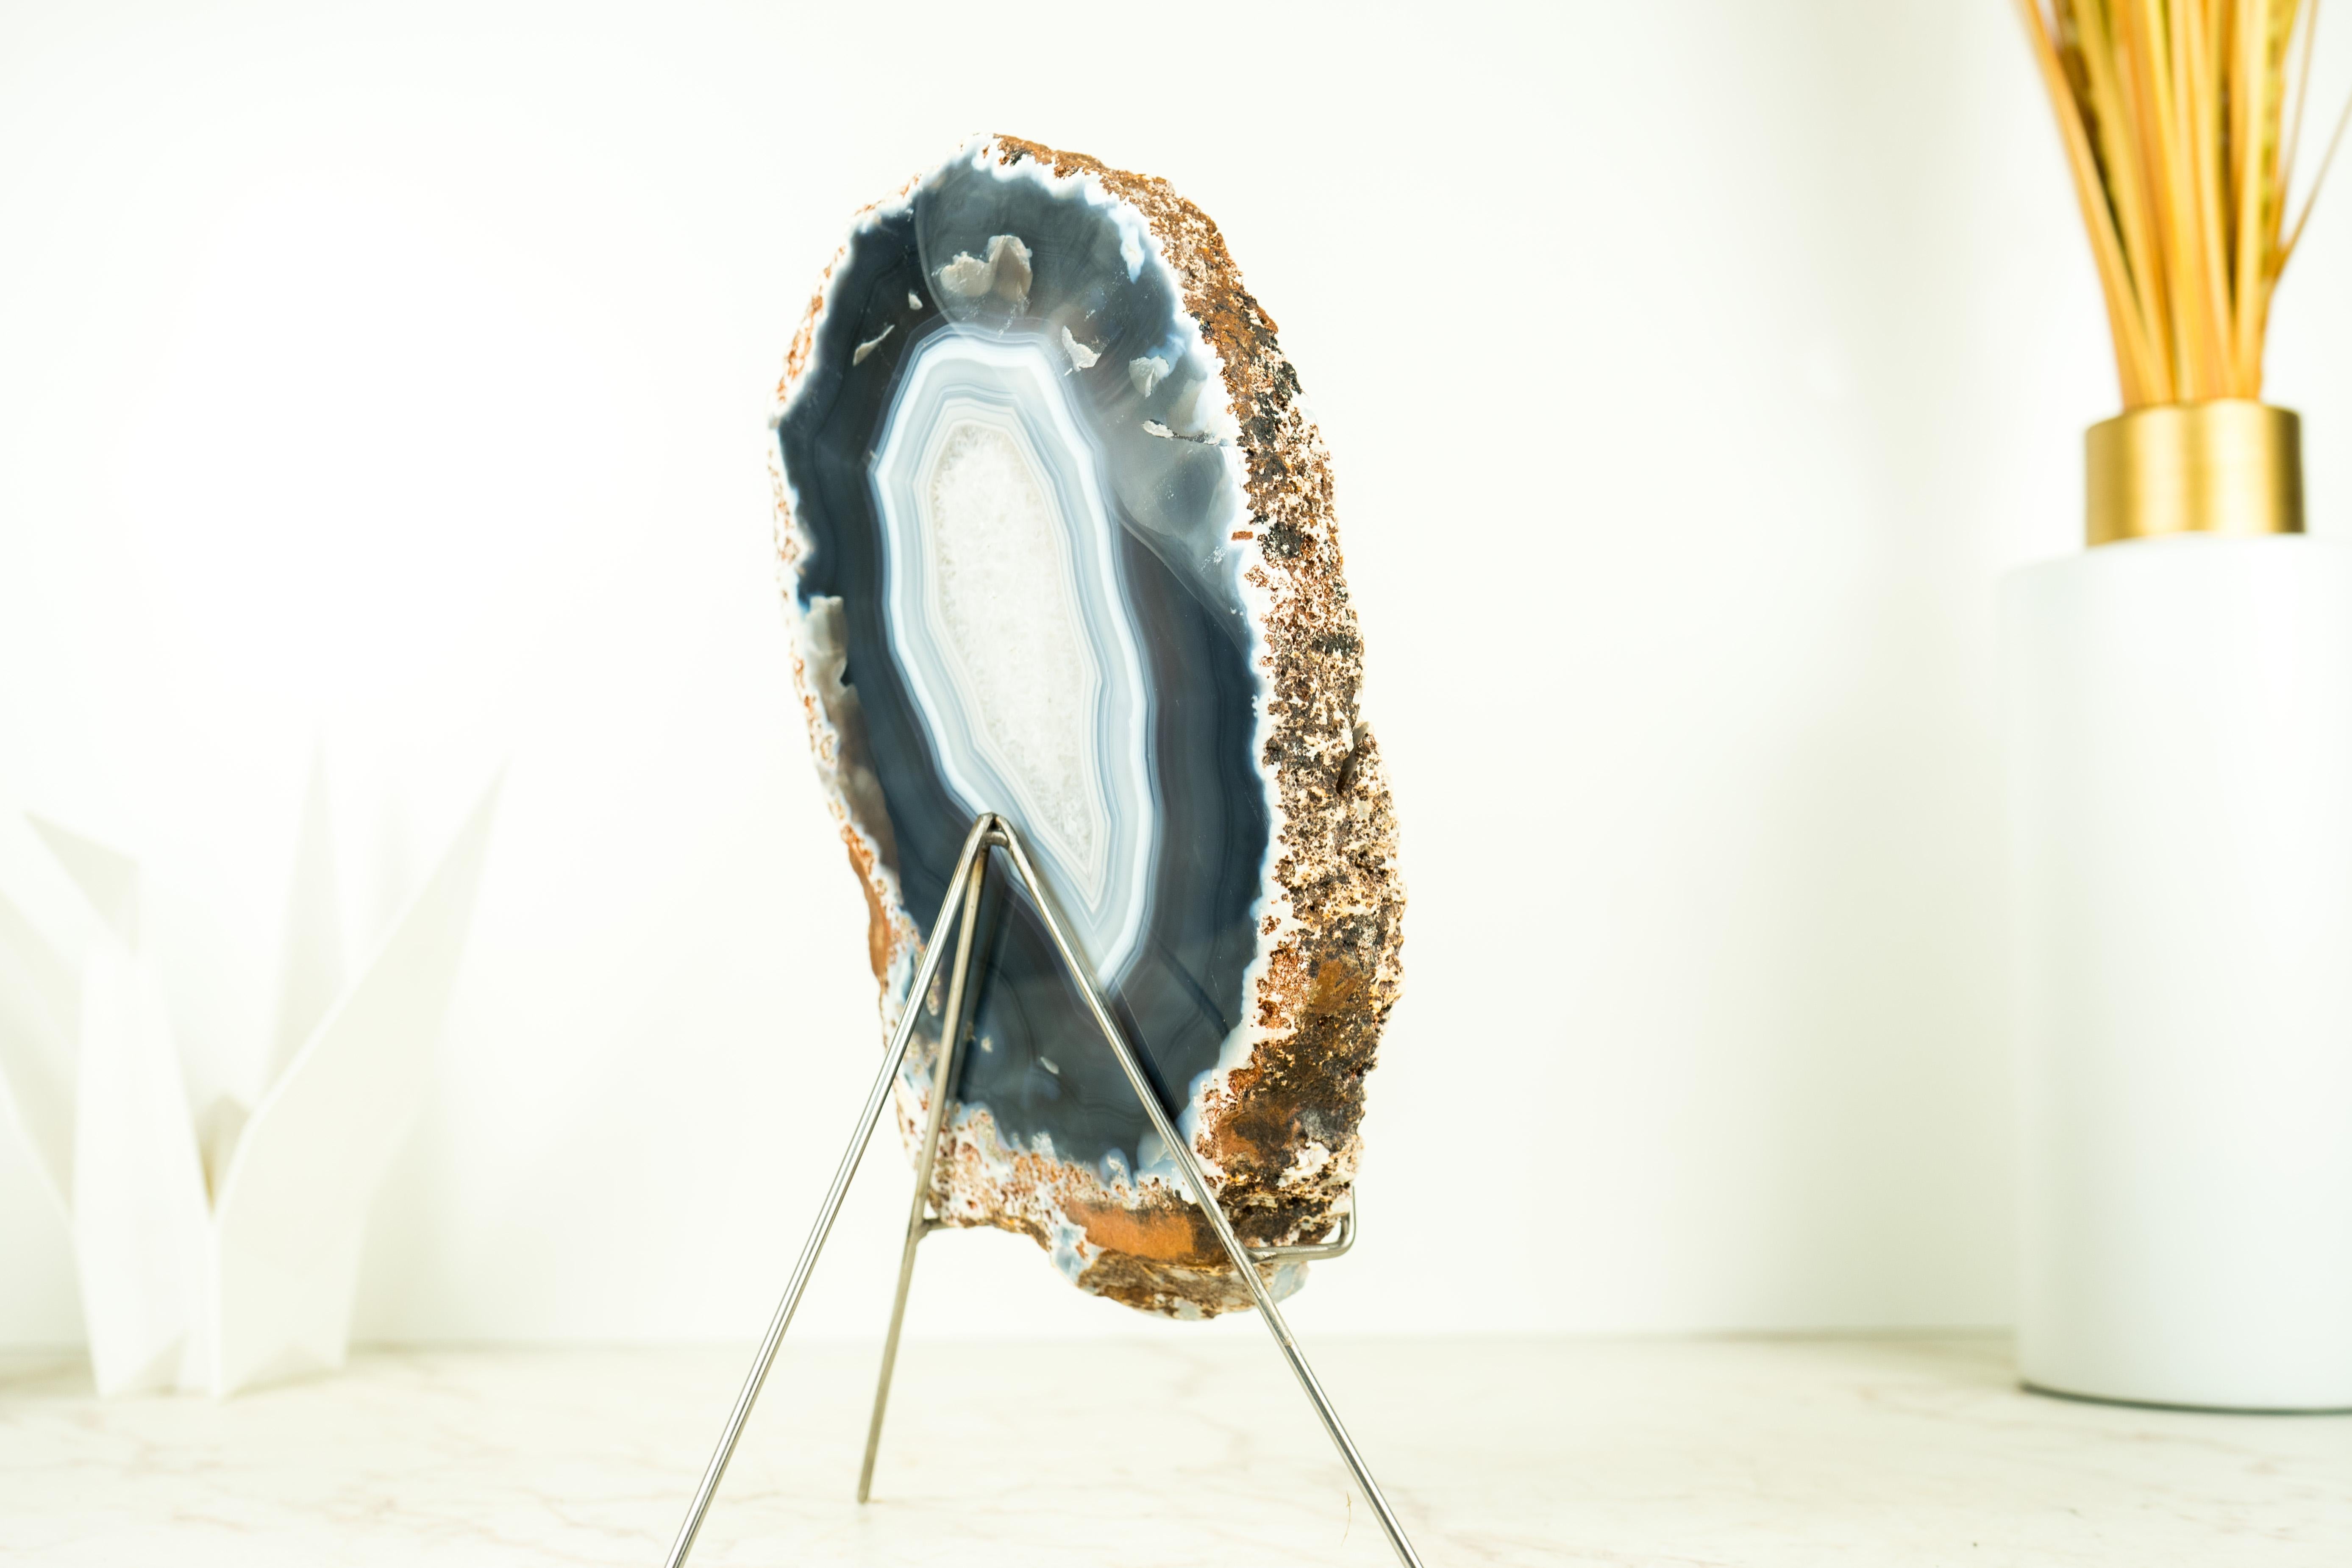 Natural Blue Banded Agate Geode with Blue and White Laces

▫️ Description

Gorgeous and intact, with superb blue and white agate laces (also known as Blue Lace Agate), this agate geode is considered to be of Super Extra quality due to its beauty,